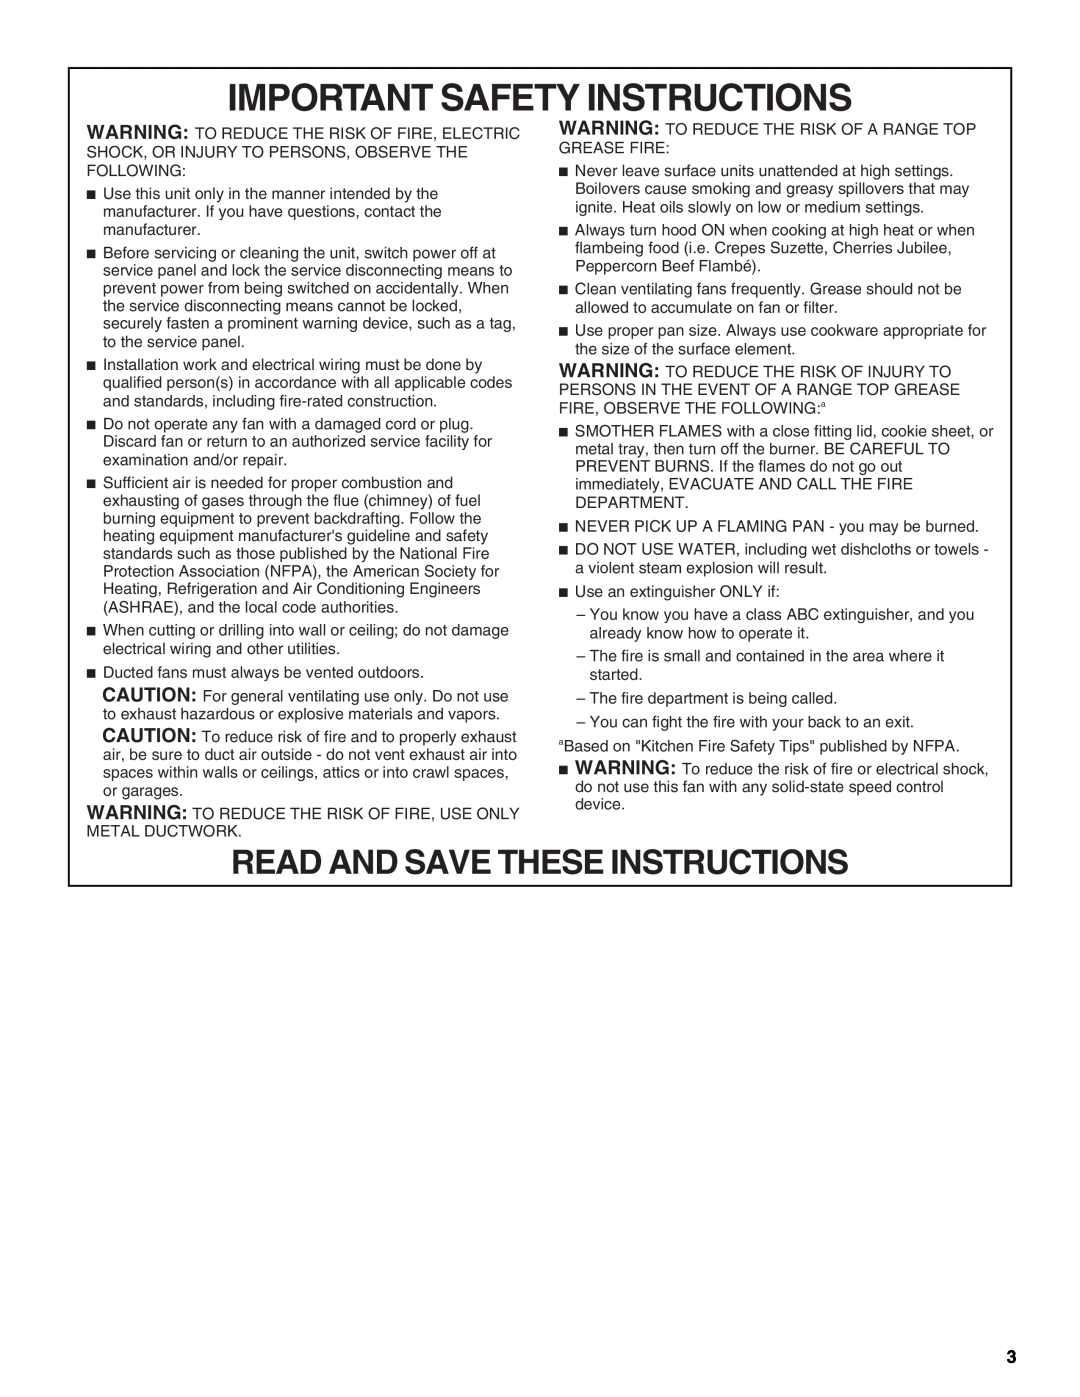 Whirlpool 36, 48 installation instructions Important Safety Instructions, Read And Save These Instructions 